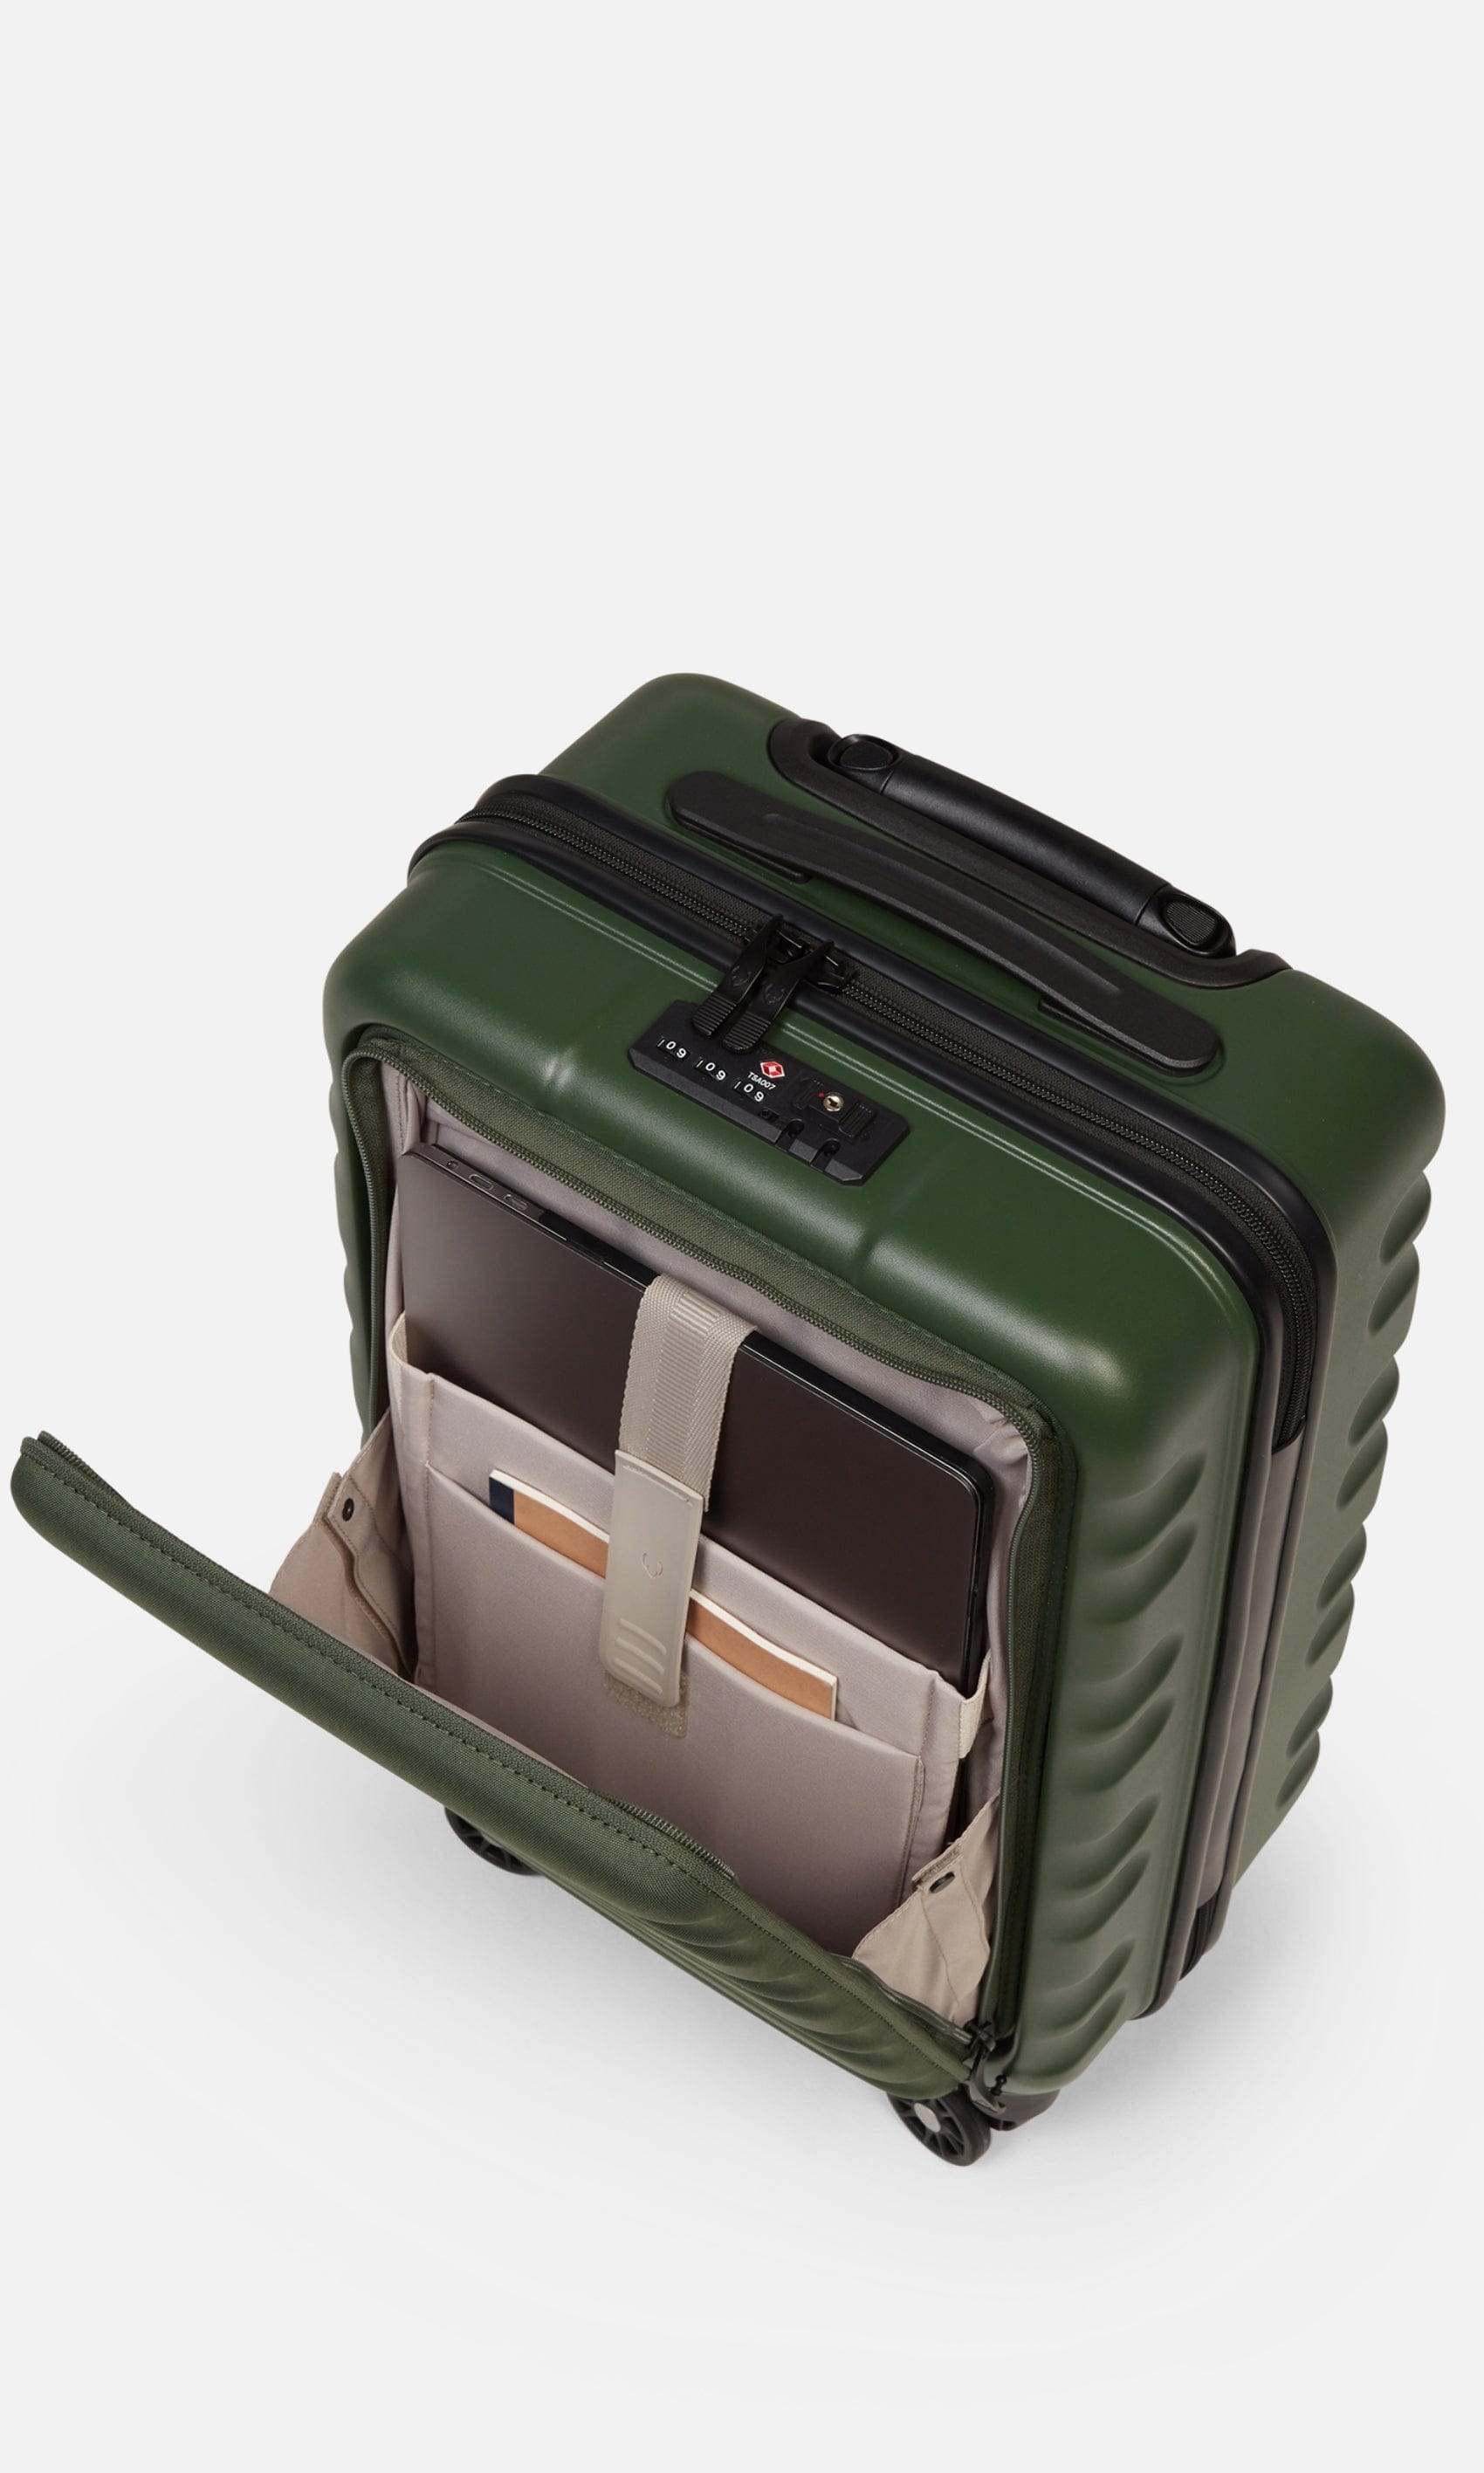 Antler Luggage -  Clifton cabin with pocket in woodland green - Hard Suitcases Clifton Cabin Pocket Suitcase Woodland Green | Hard Suitcase | Antler UK